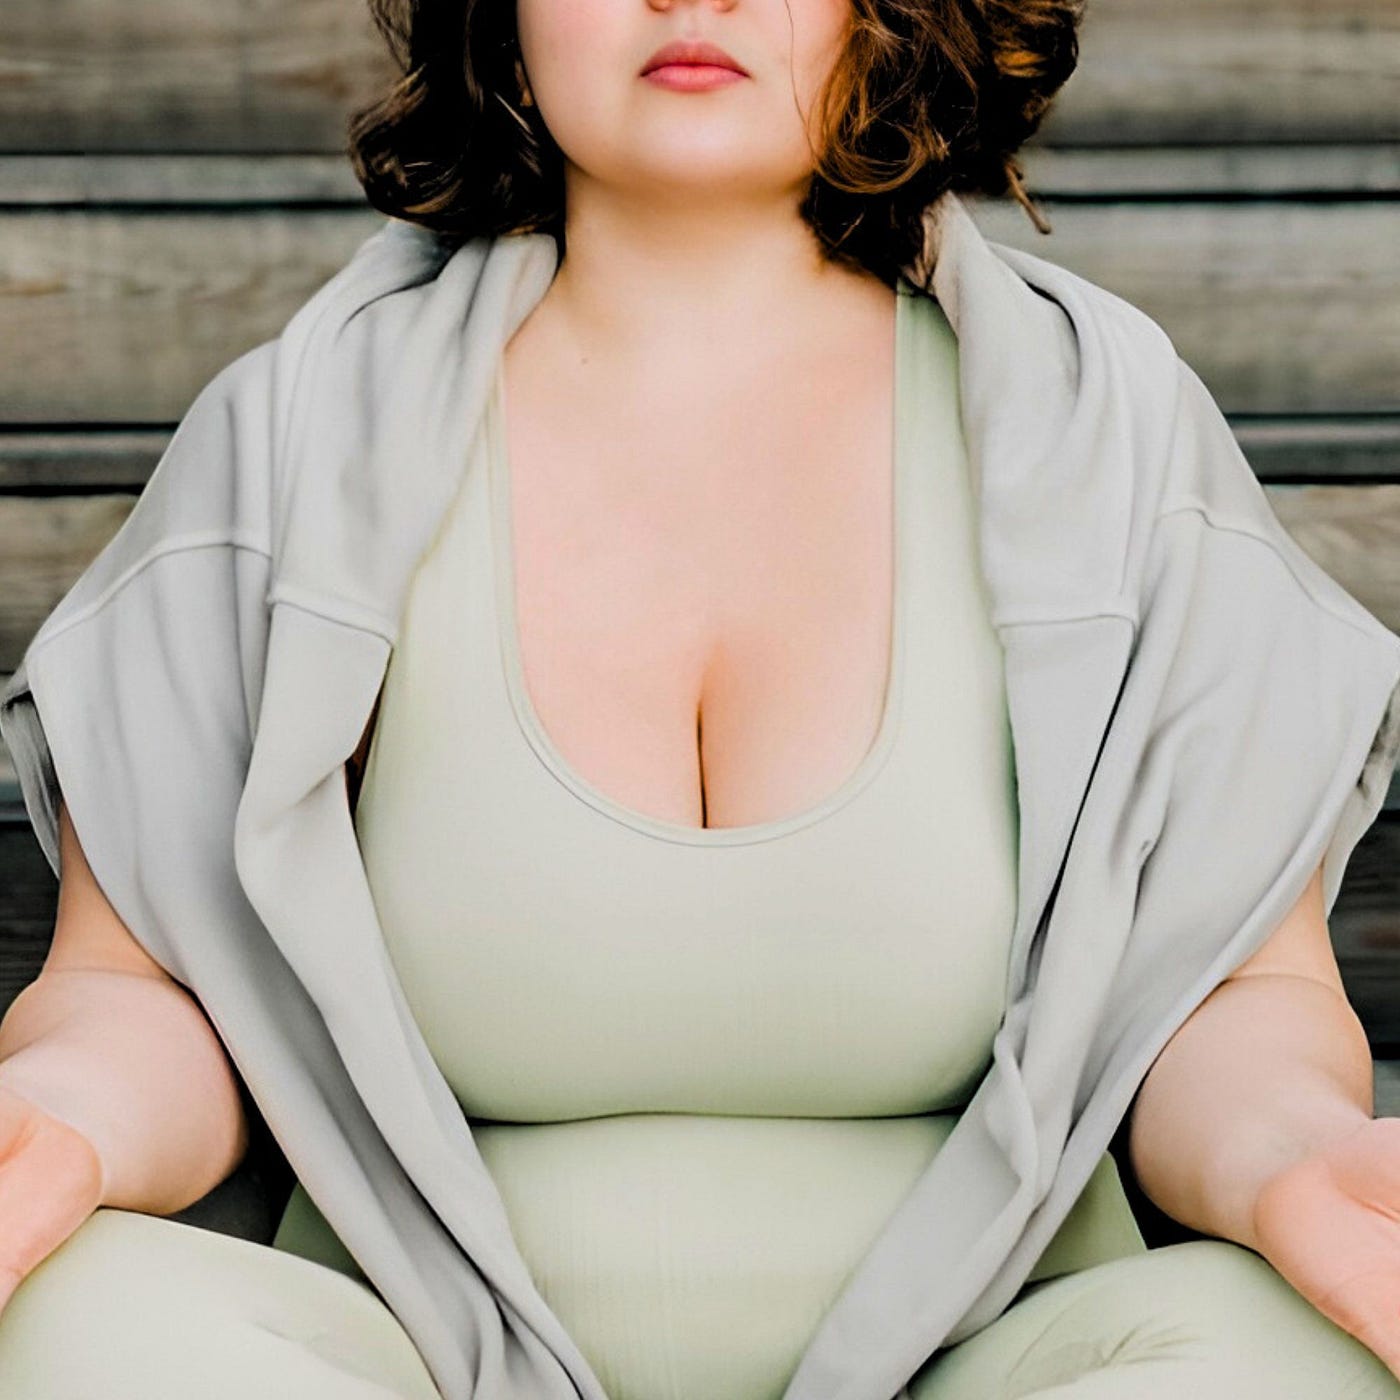 The Pros and Cons of Having Big Boobs, by Julia, BoobTalk Magazine